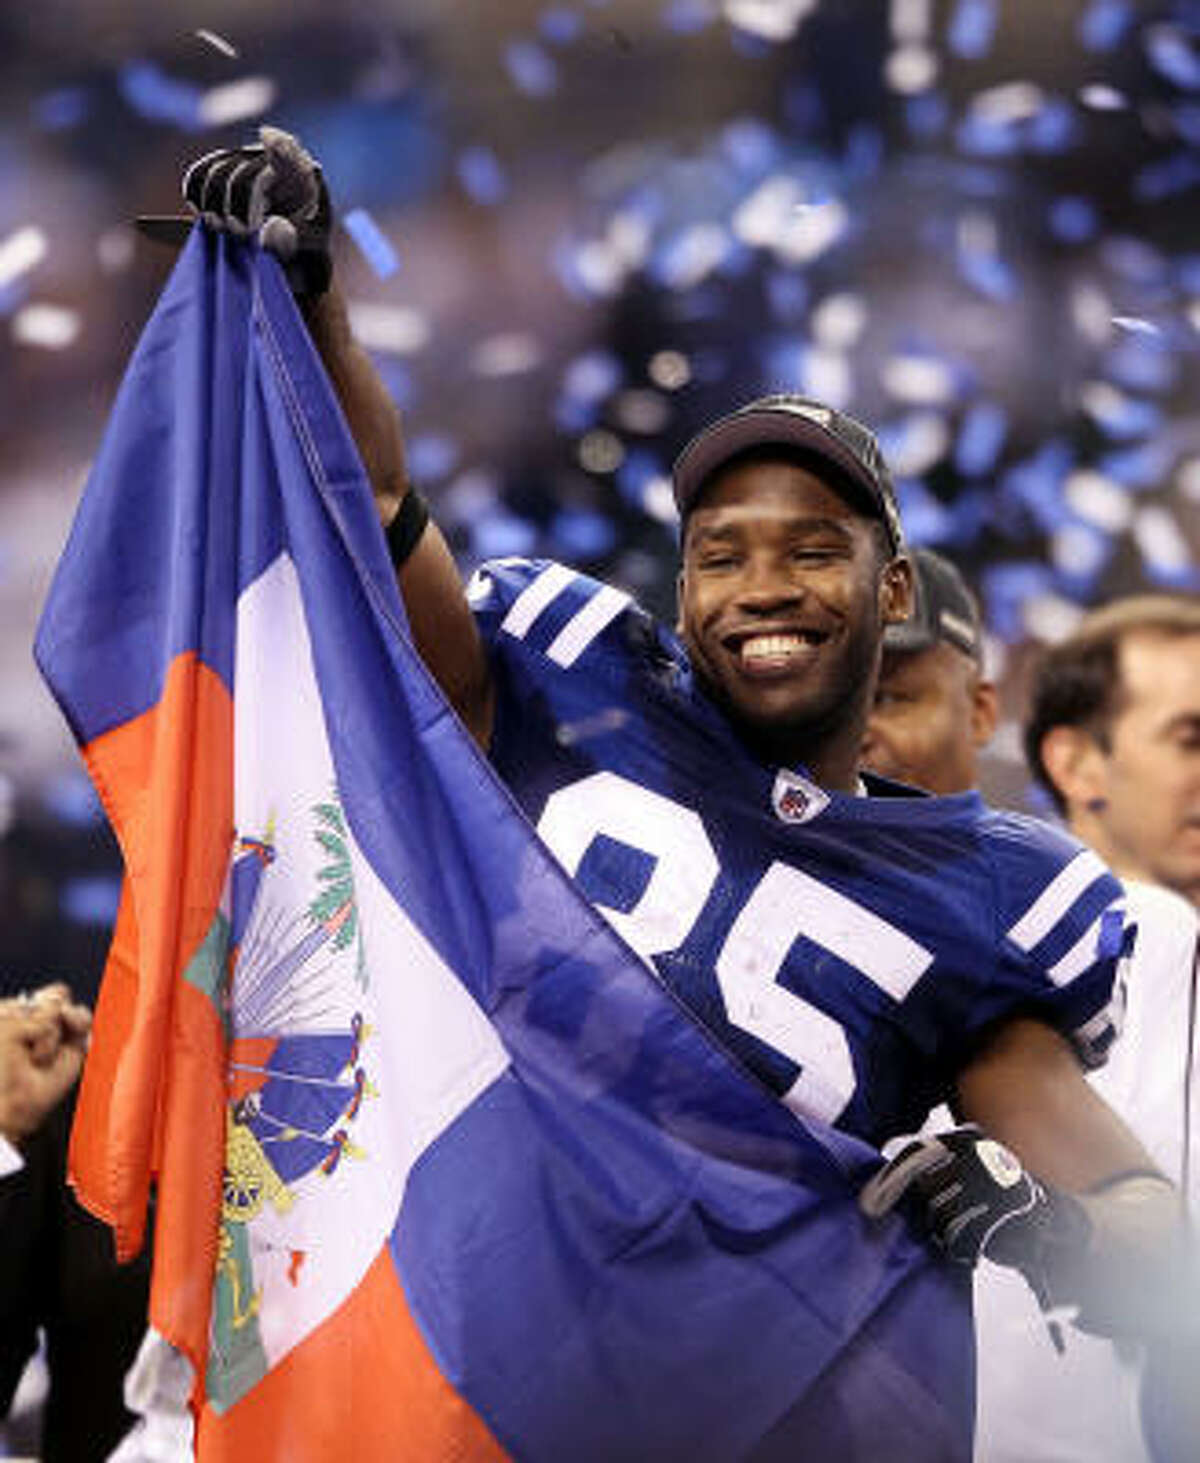 Colts receiver Pierre Garcon celebrates with the Haitian flag after the game. Garcon, of Haitian origin, caught 11 passes for 151 yards.